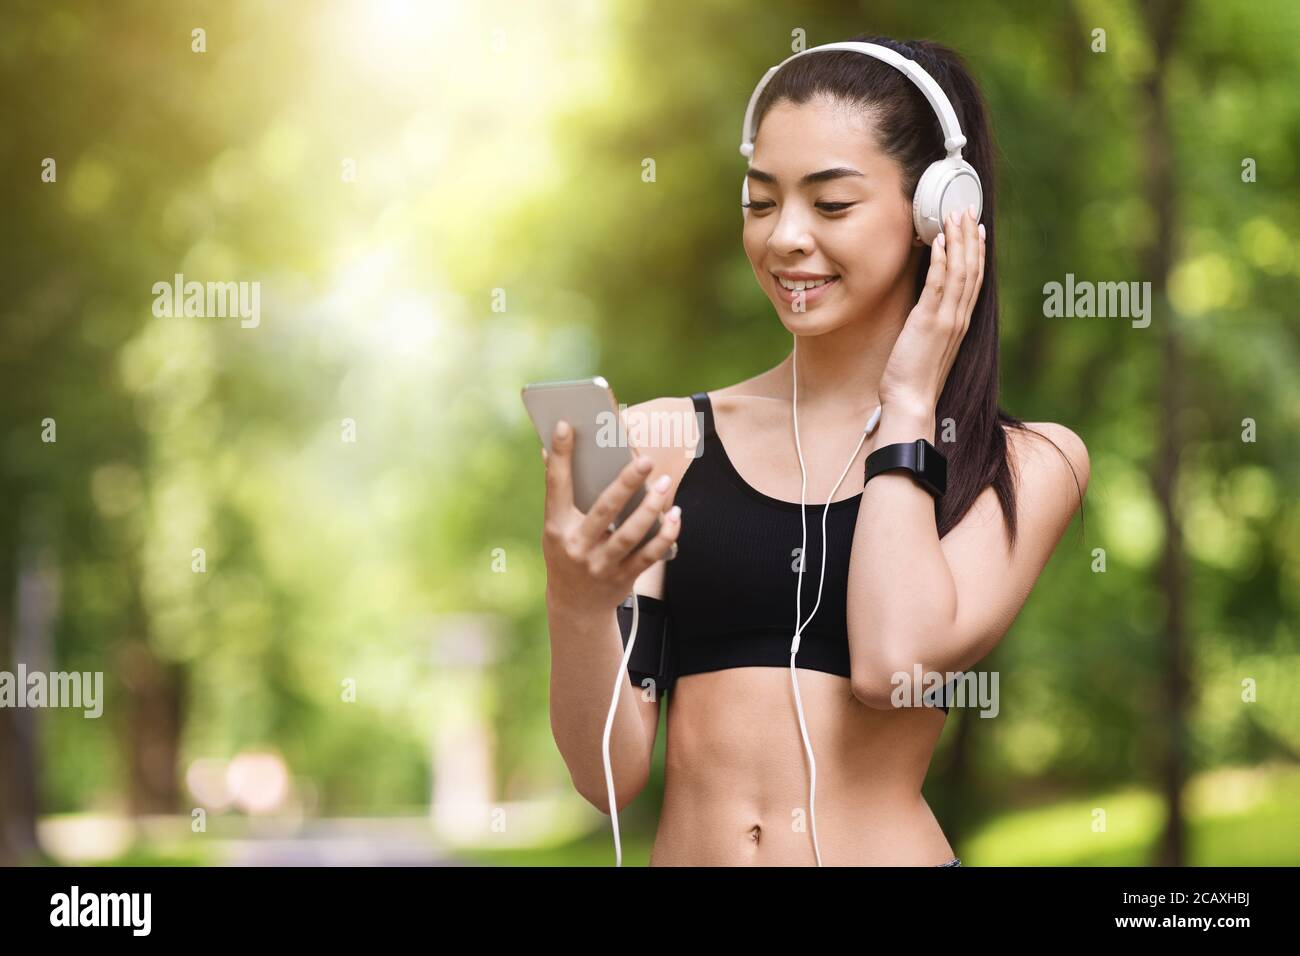 Cheerful Jogger Girl With Smartphone And Headphones Choosing Playlist For Running Outdoors Stock Photo